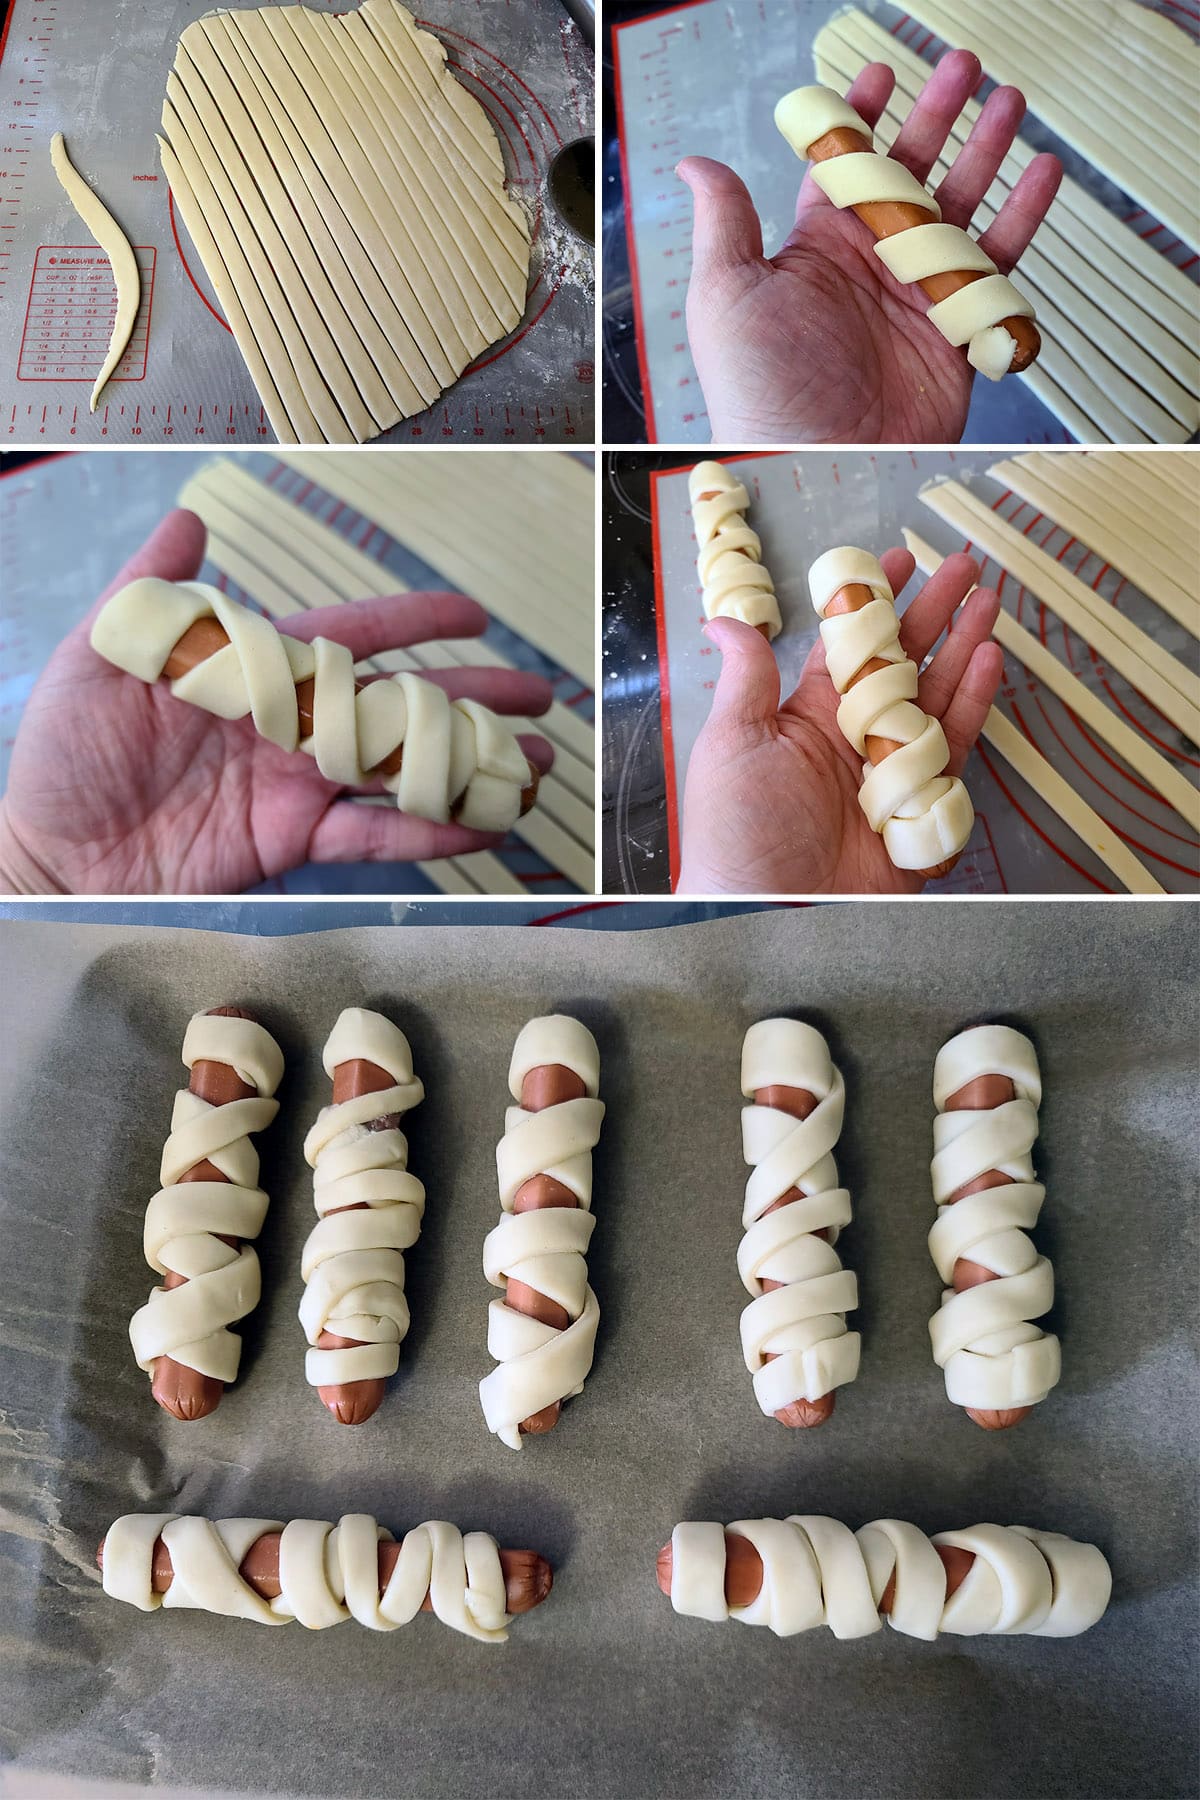 A 5 part image showing the dough being cut into strips and wrapped about the weiners.